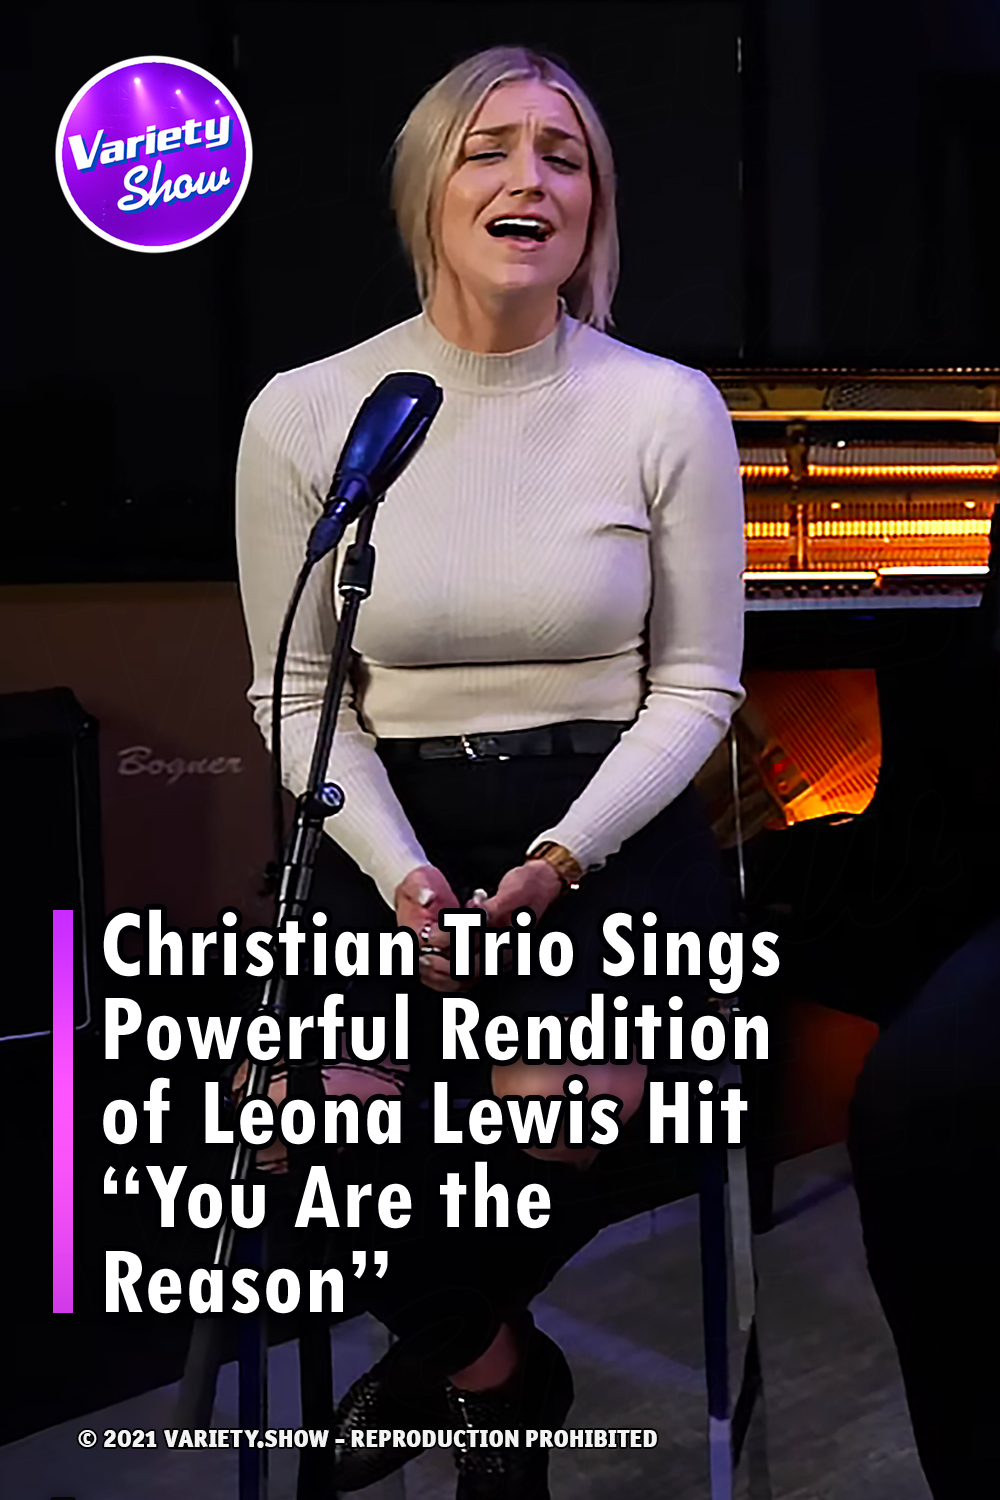 Christian Trio Sings Powerful Rendition of Leona Lewis Hit “You Are the Reason”